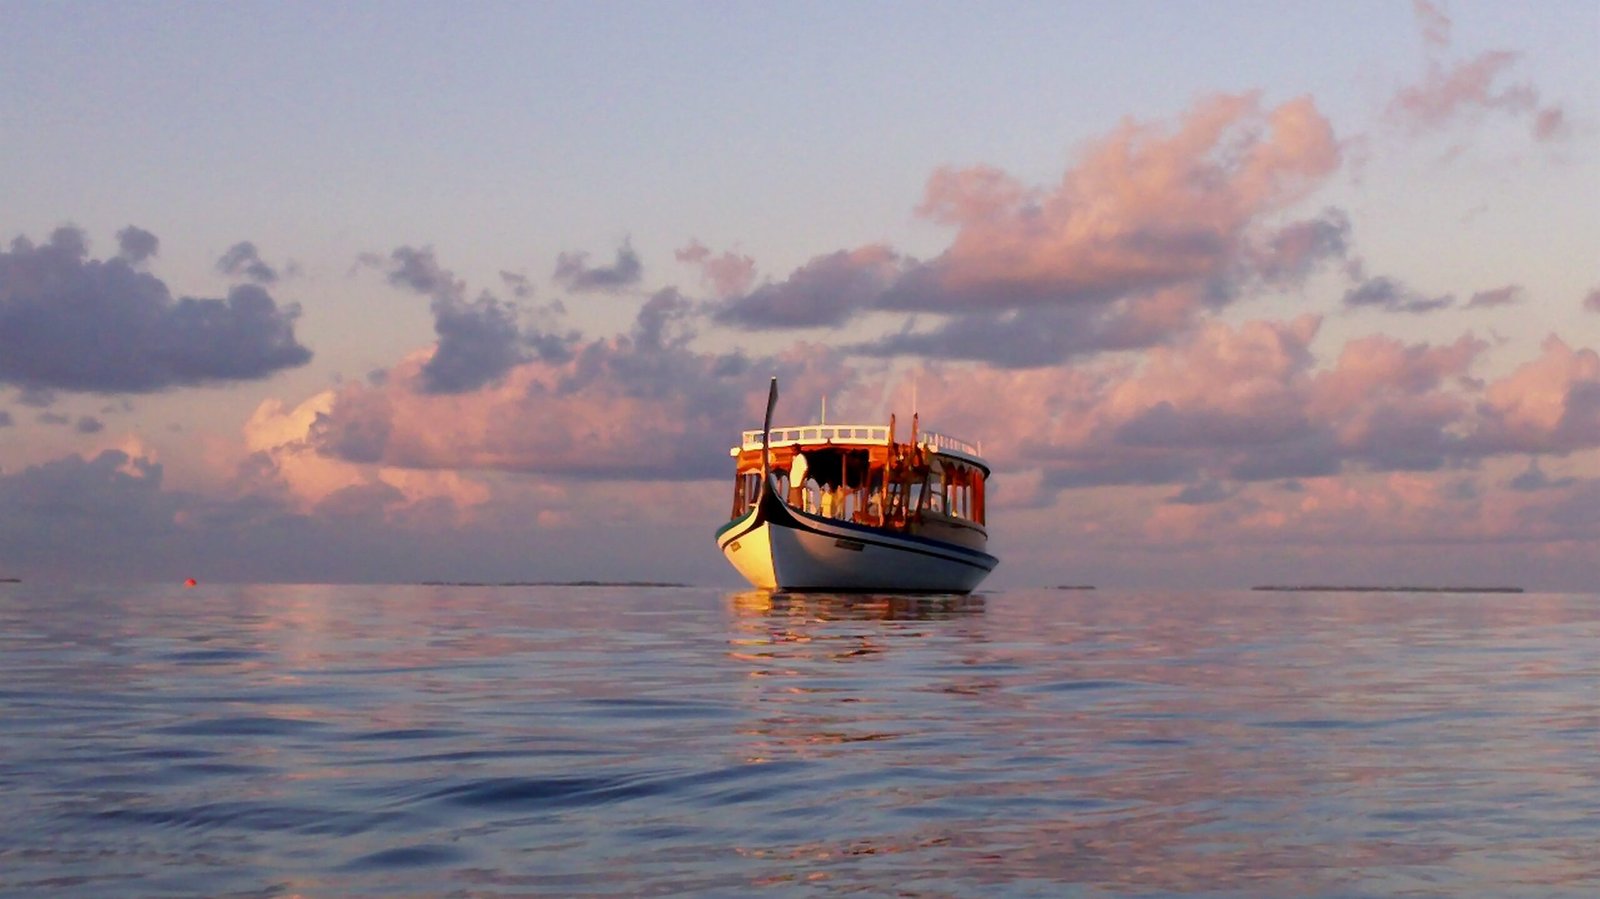 Maldives Boat Cruise - Things to do in Maldives